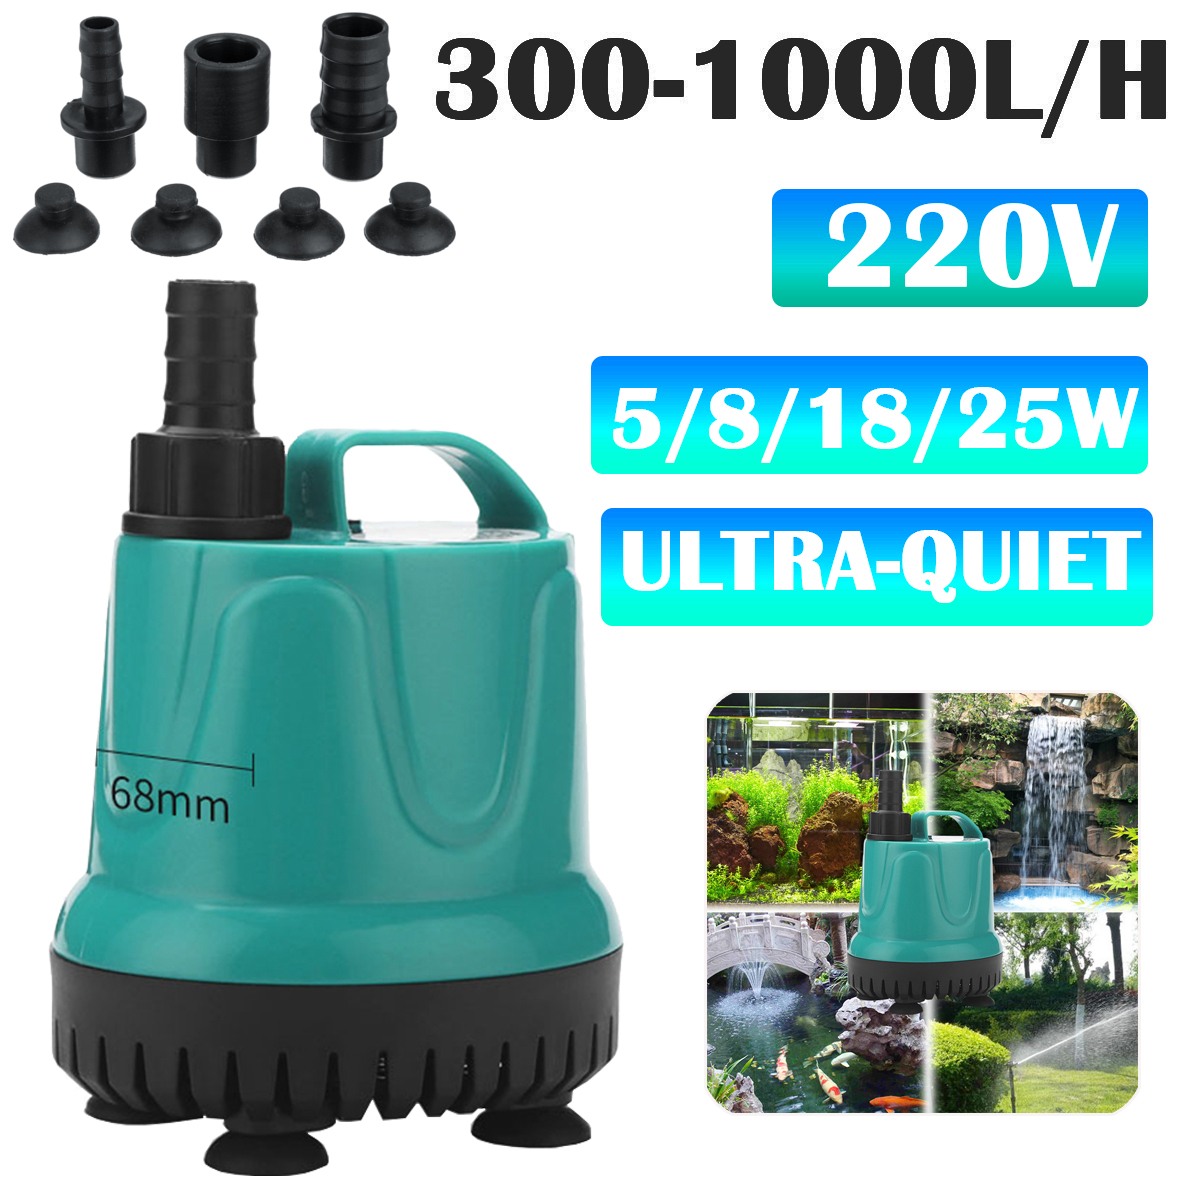 581825W-Ultra-quiet-Mini-Brushless-Water-Pump-Filter-Waterproof-Submersible-Water-Fountain-Pump-For--1646198-2